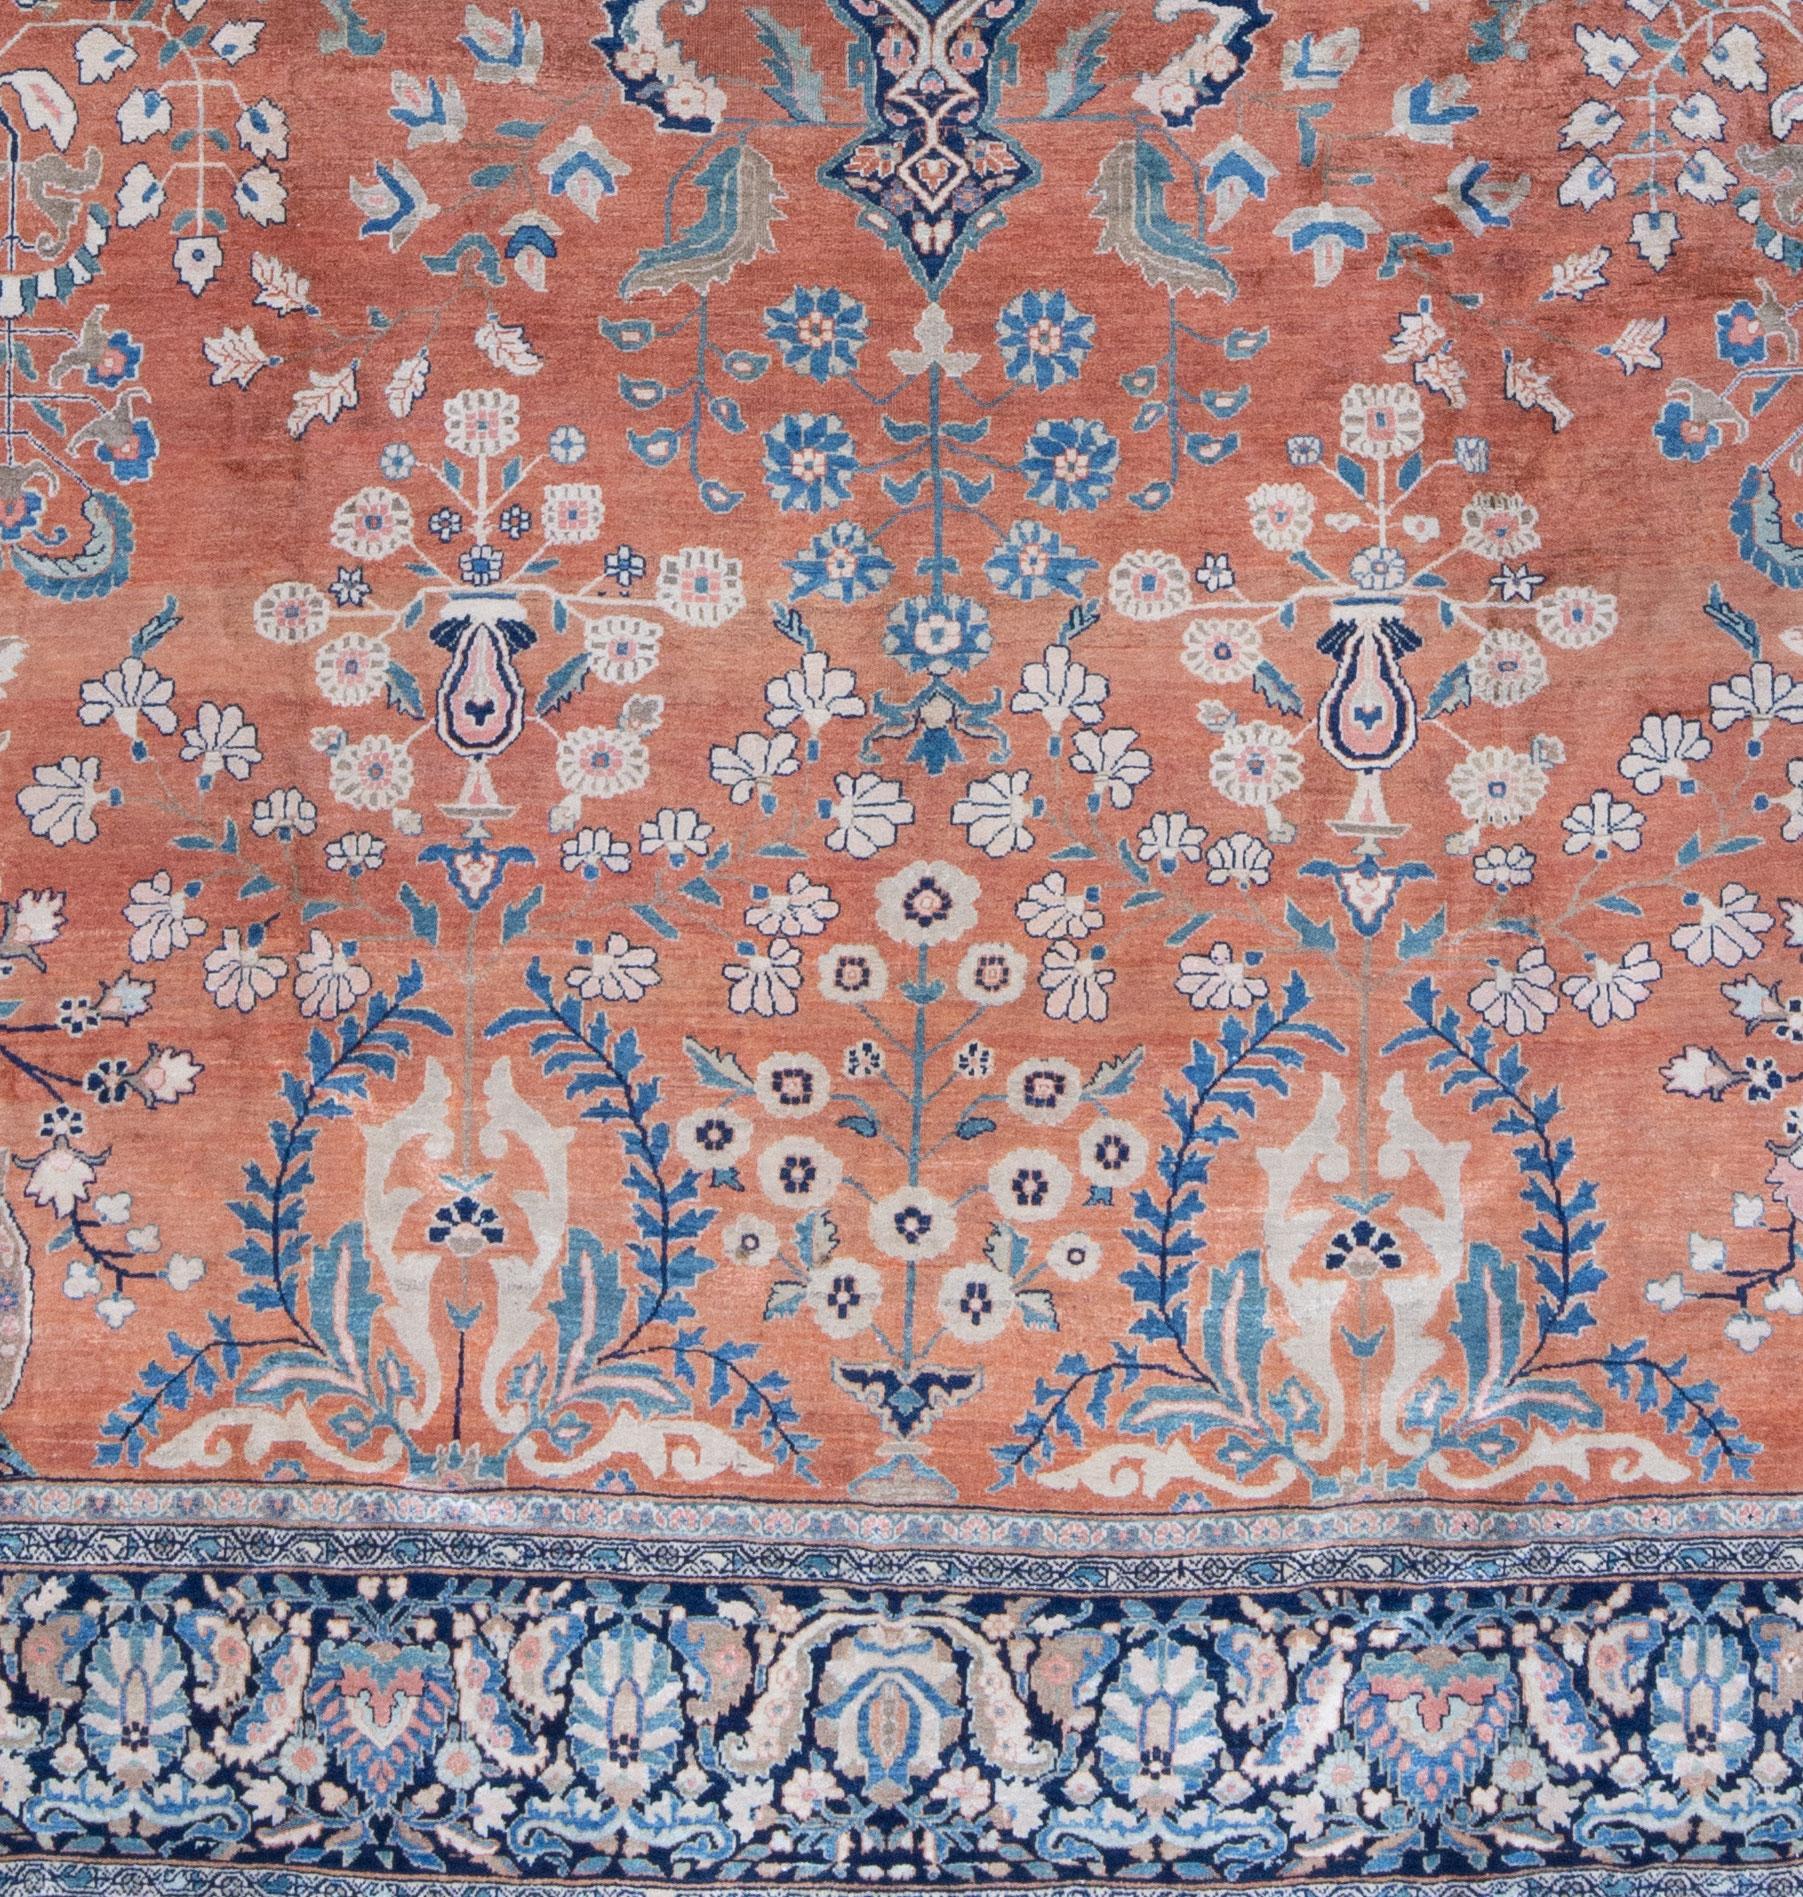 A late 19th Century Ferahan Sarouk a with coral field color and beautiful shades pinks, greens and indigo and navy blue. Delicate floral motifs with meandering vines. A very finely woven carpet with a dense, low wool pile. In beautiful condition